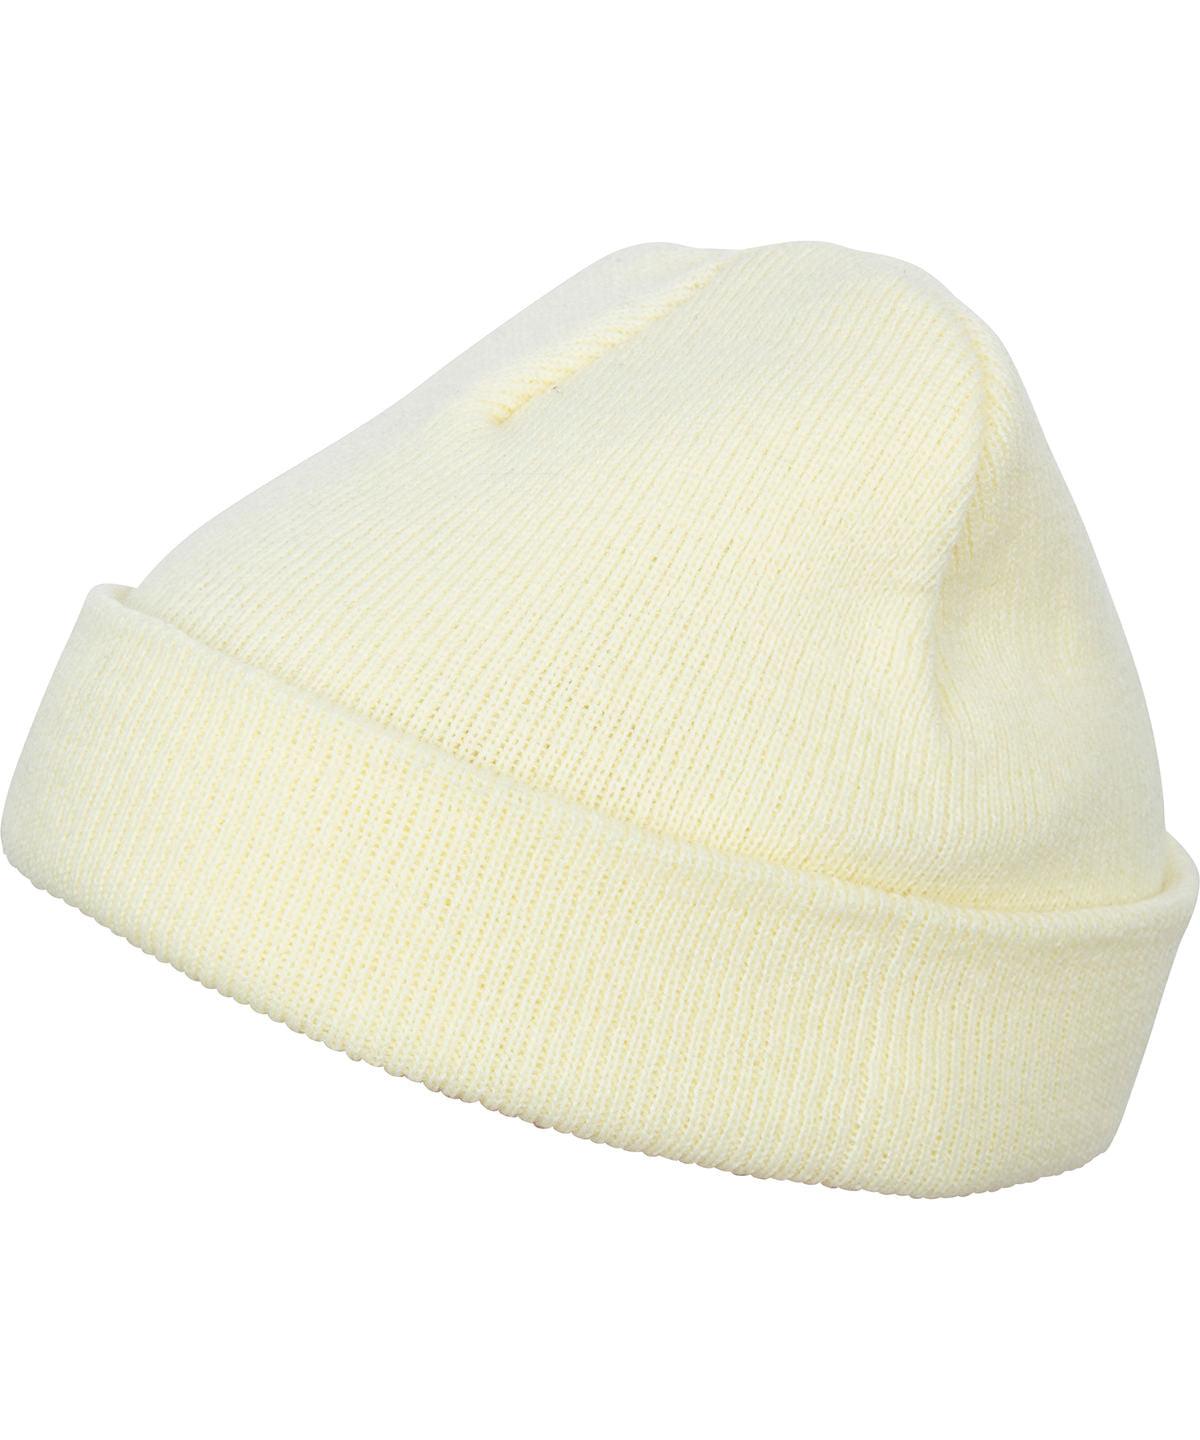 Powdery Yellow - Heavyweight beanie (1500KC) Hats Flexfit by Yupoong Headwear, New Colours for 2023, Winter Essentials Schoolwear Centres